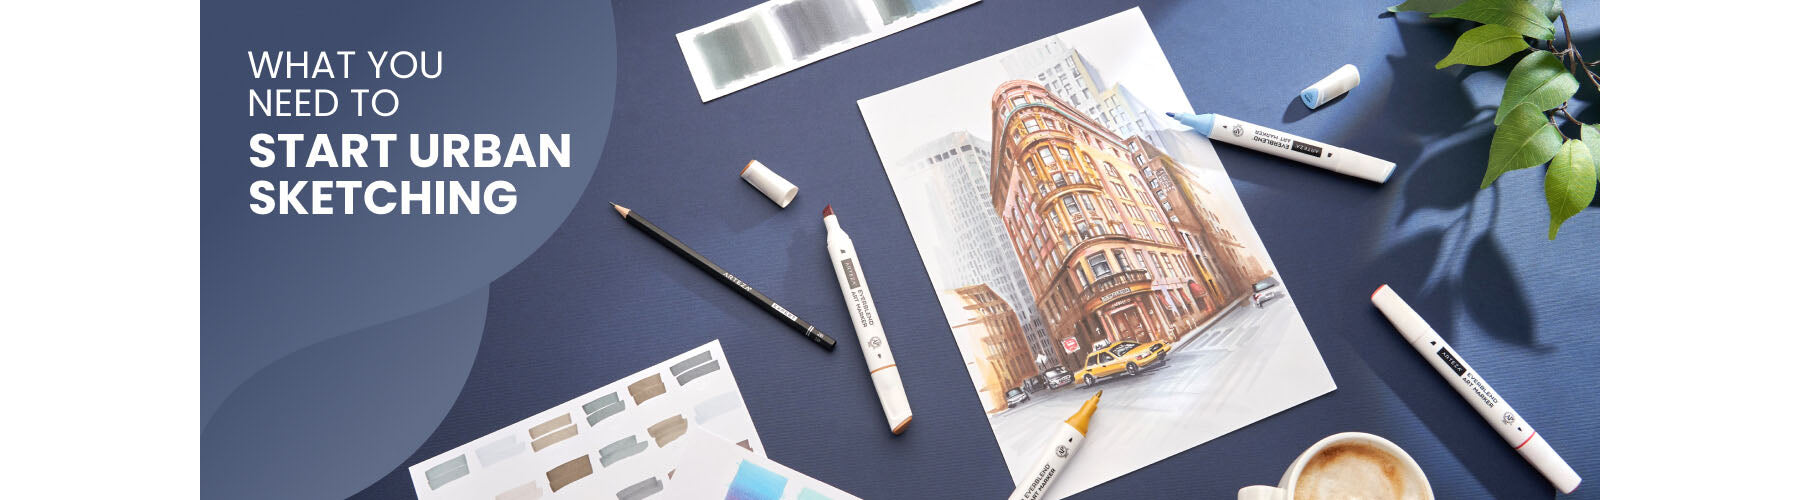 The Ultimate Guide to Sketching Supplies for beginning Urban Sketchers